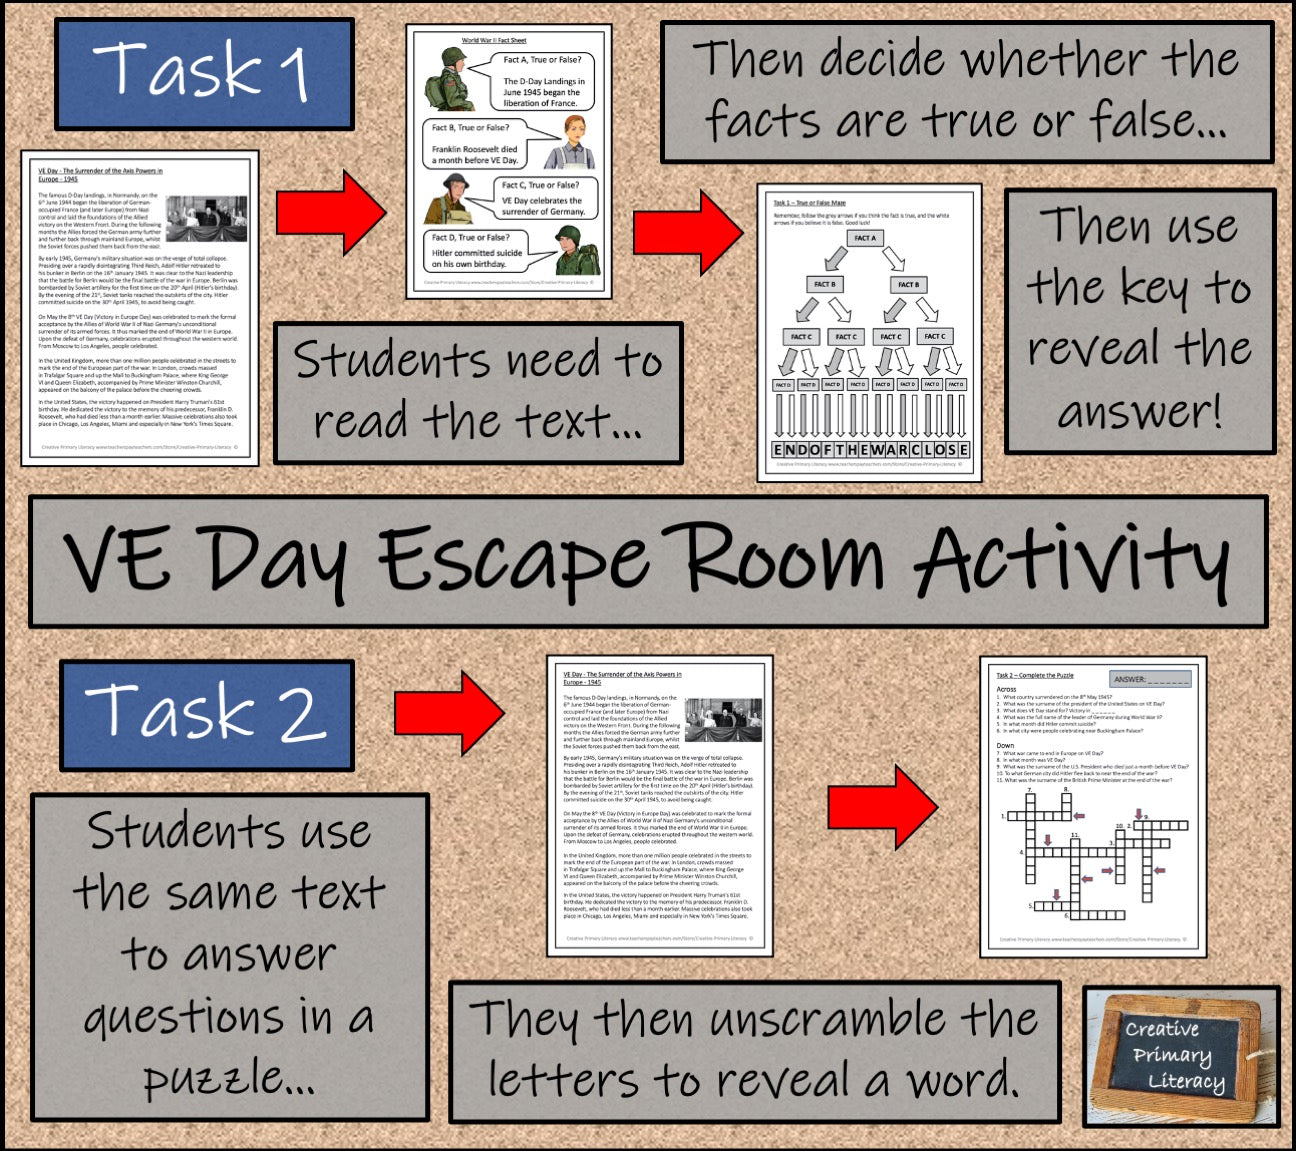 VE Day Escape Room Activity